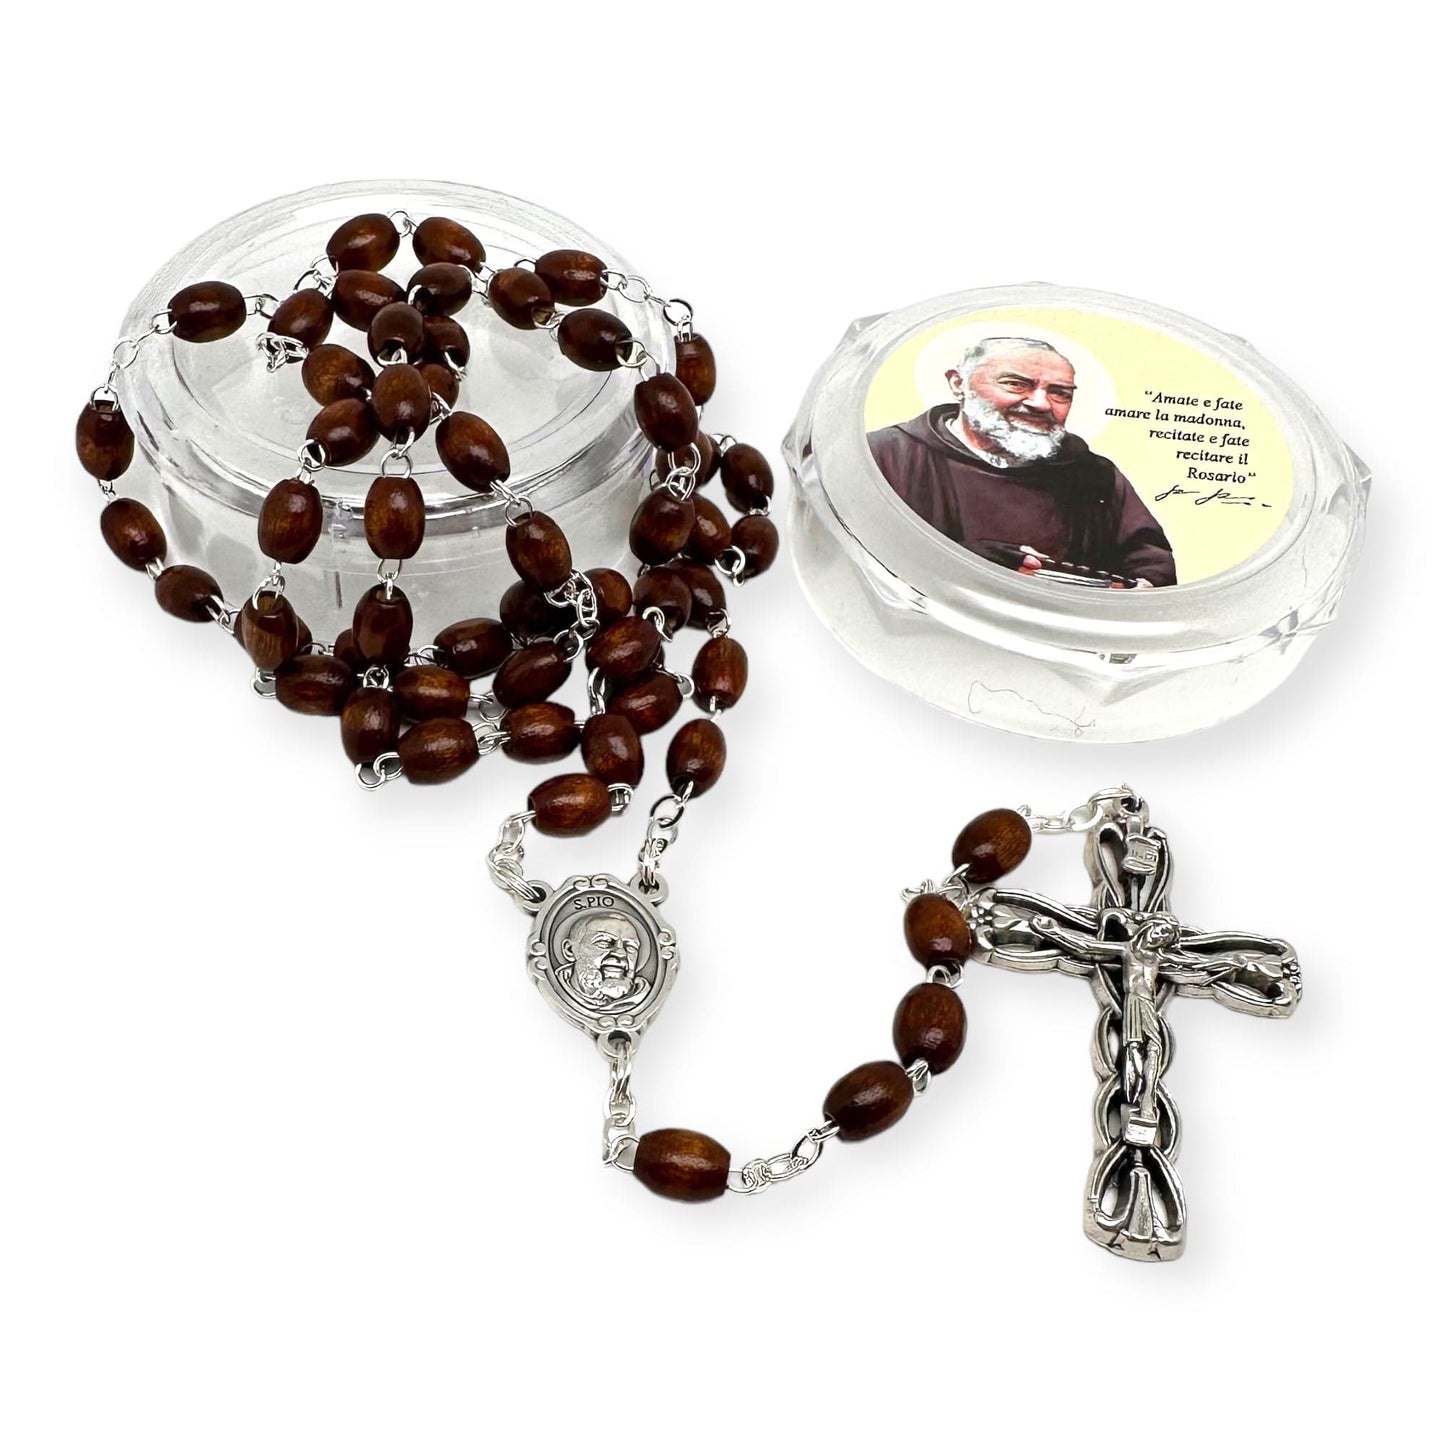 Catholically Rosaries Saint Padre Pio Rosary Blessed By Pope w/ 2nd Class Relic - St. Father Pio